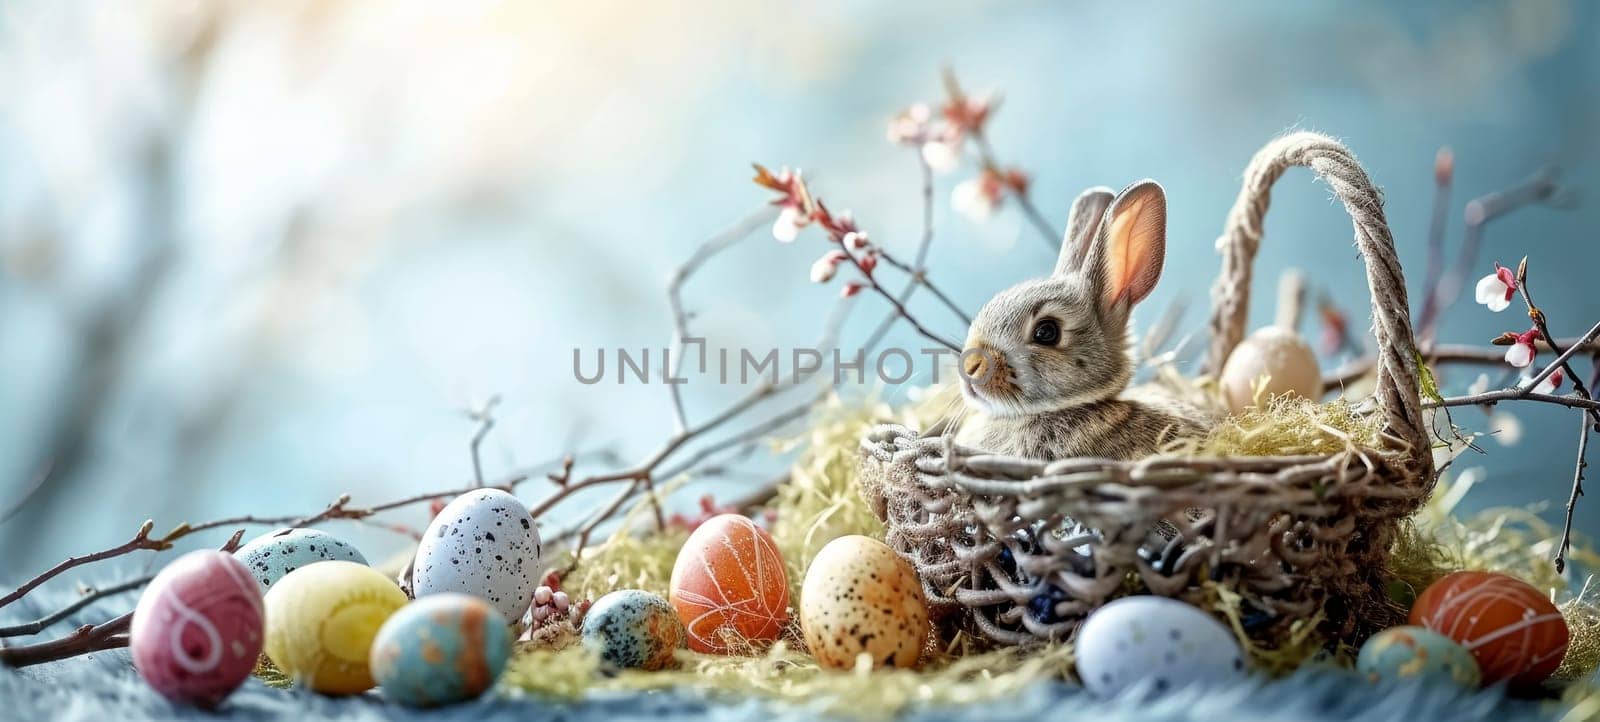 Rabbit in wicker basket with colored Easter eggs and flowers on blue background by andreyz